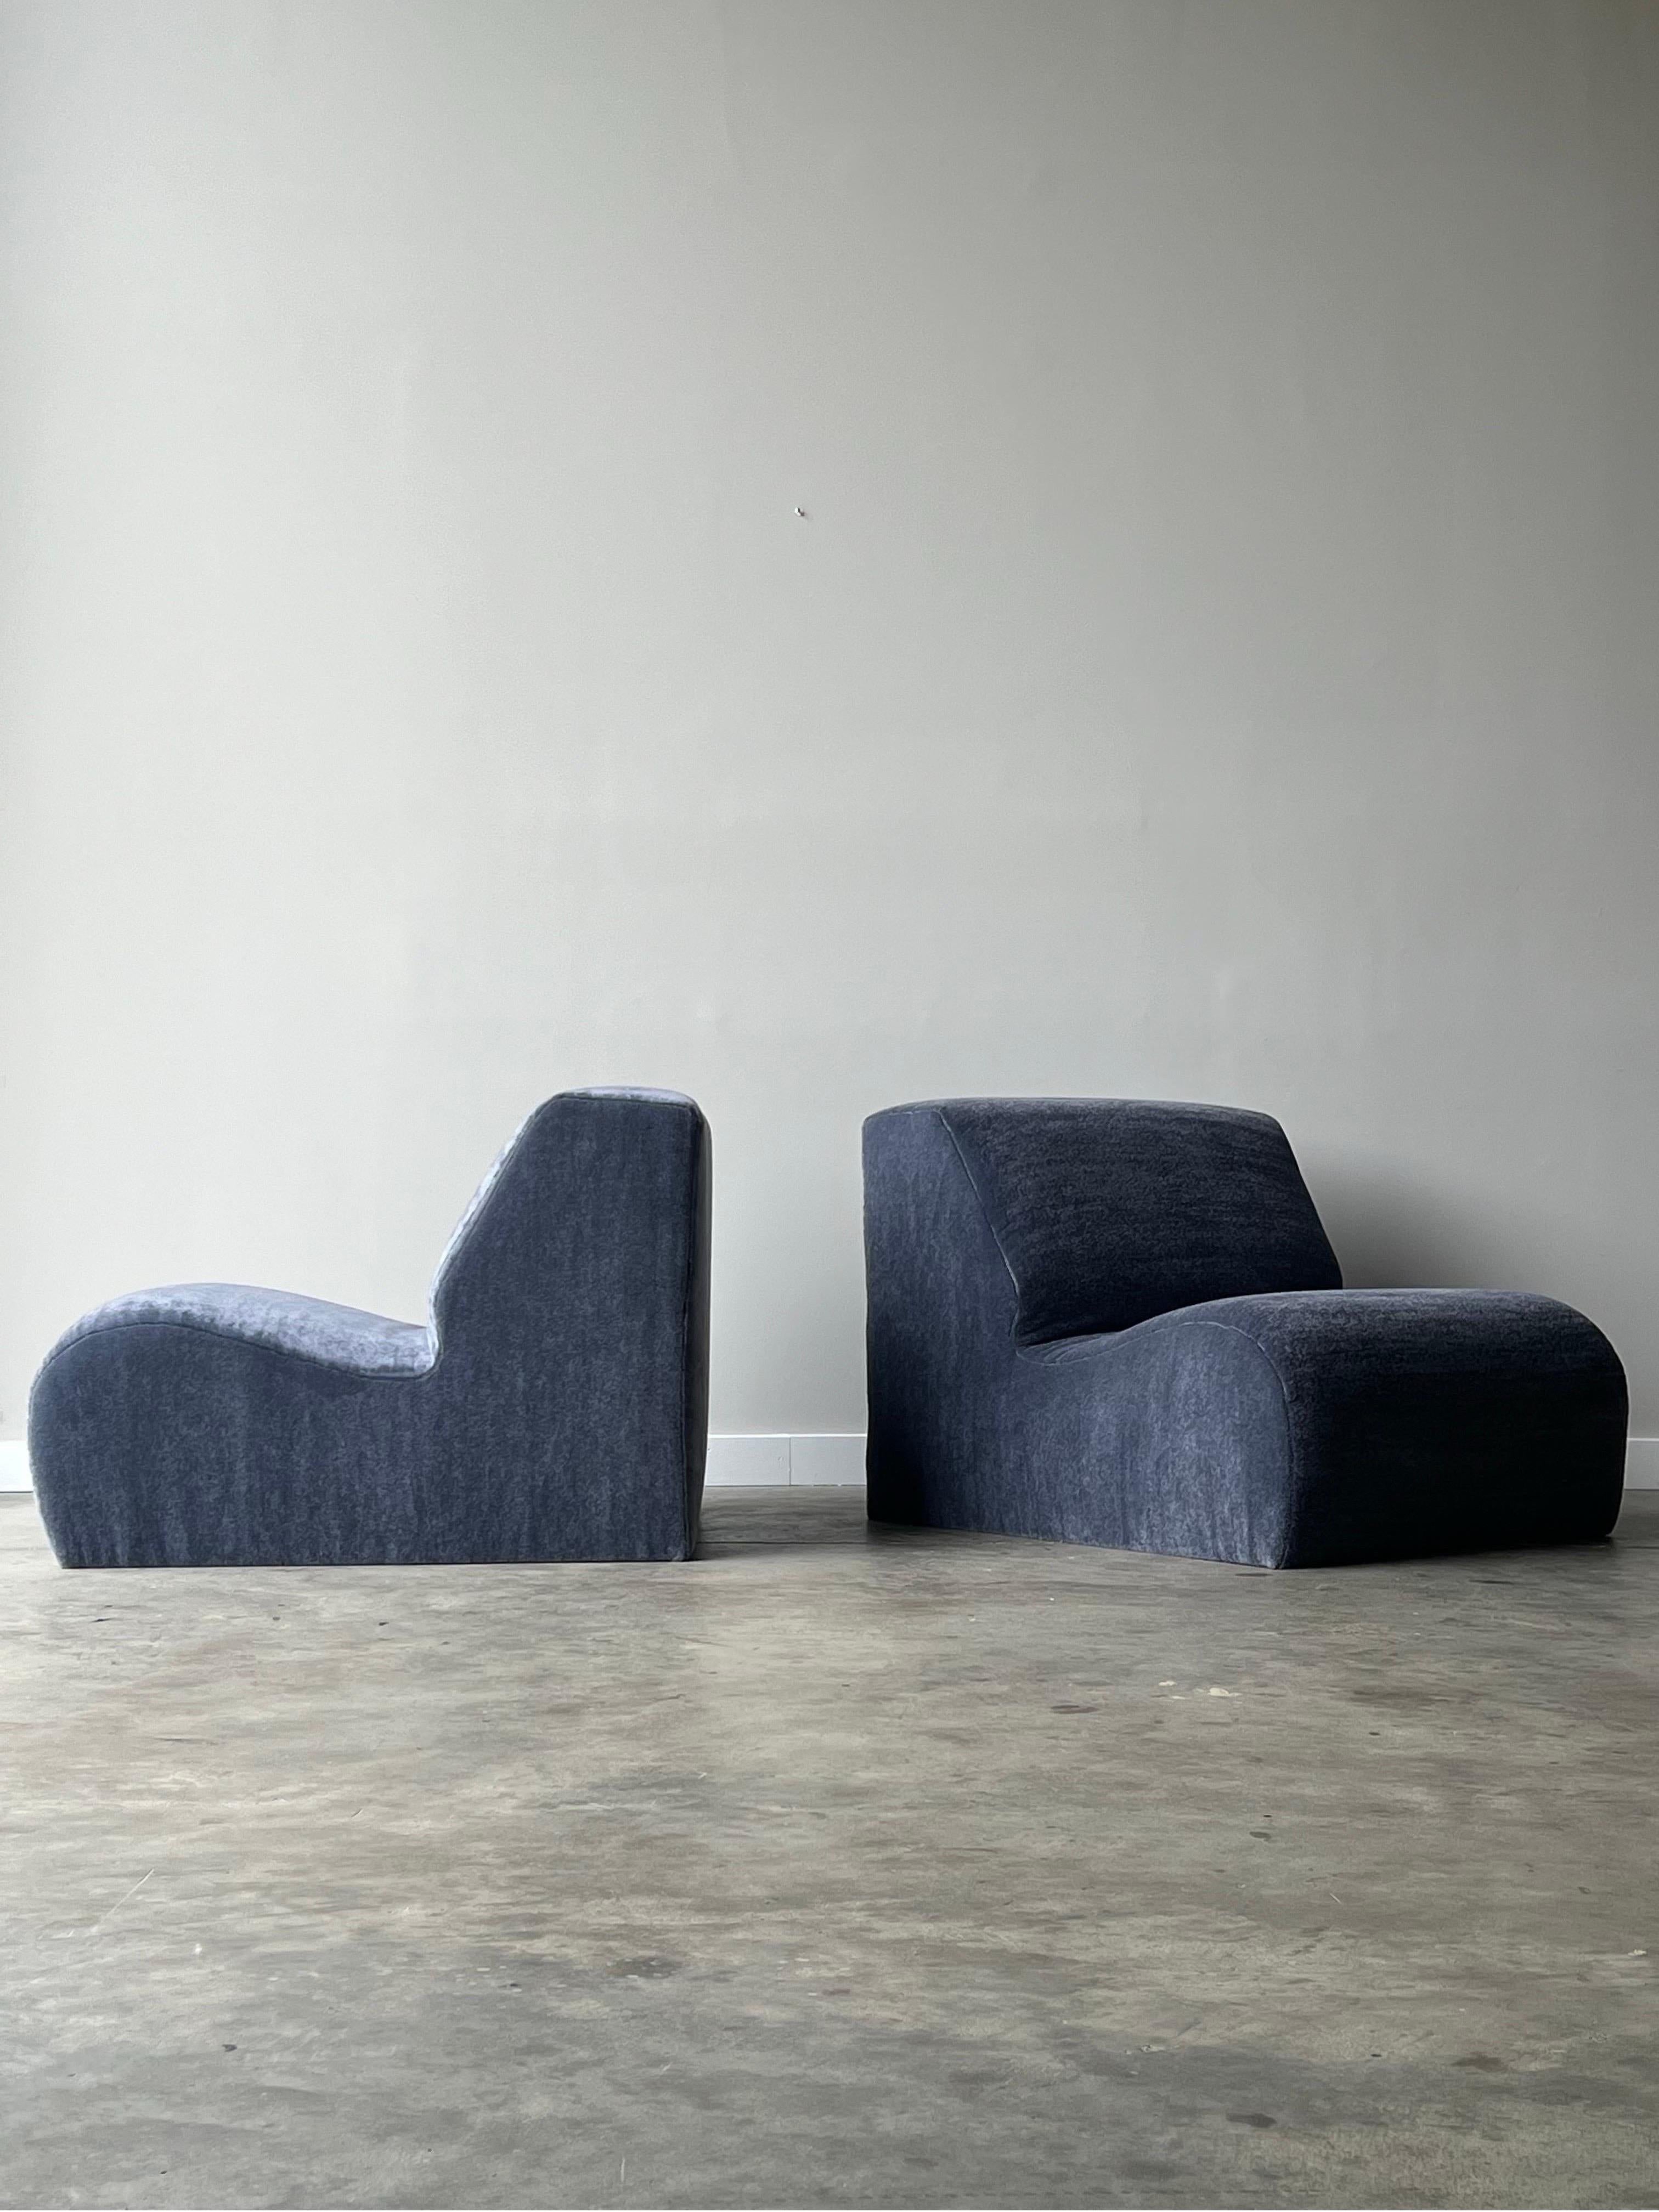 Pair of postmodern style modular lounges. These lounges can be utilized as accent chairs when separated or pushed together to create a loveseat. Made from high density foam which makes them perfectly sturdy yet comfortable. The back of the lounge